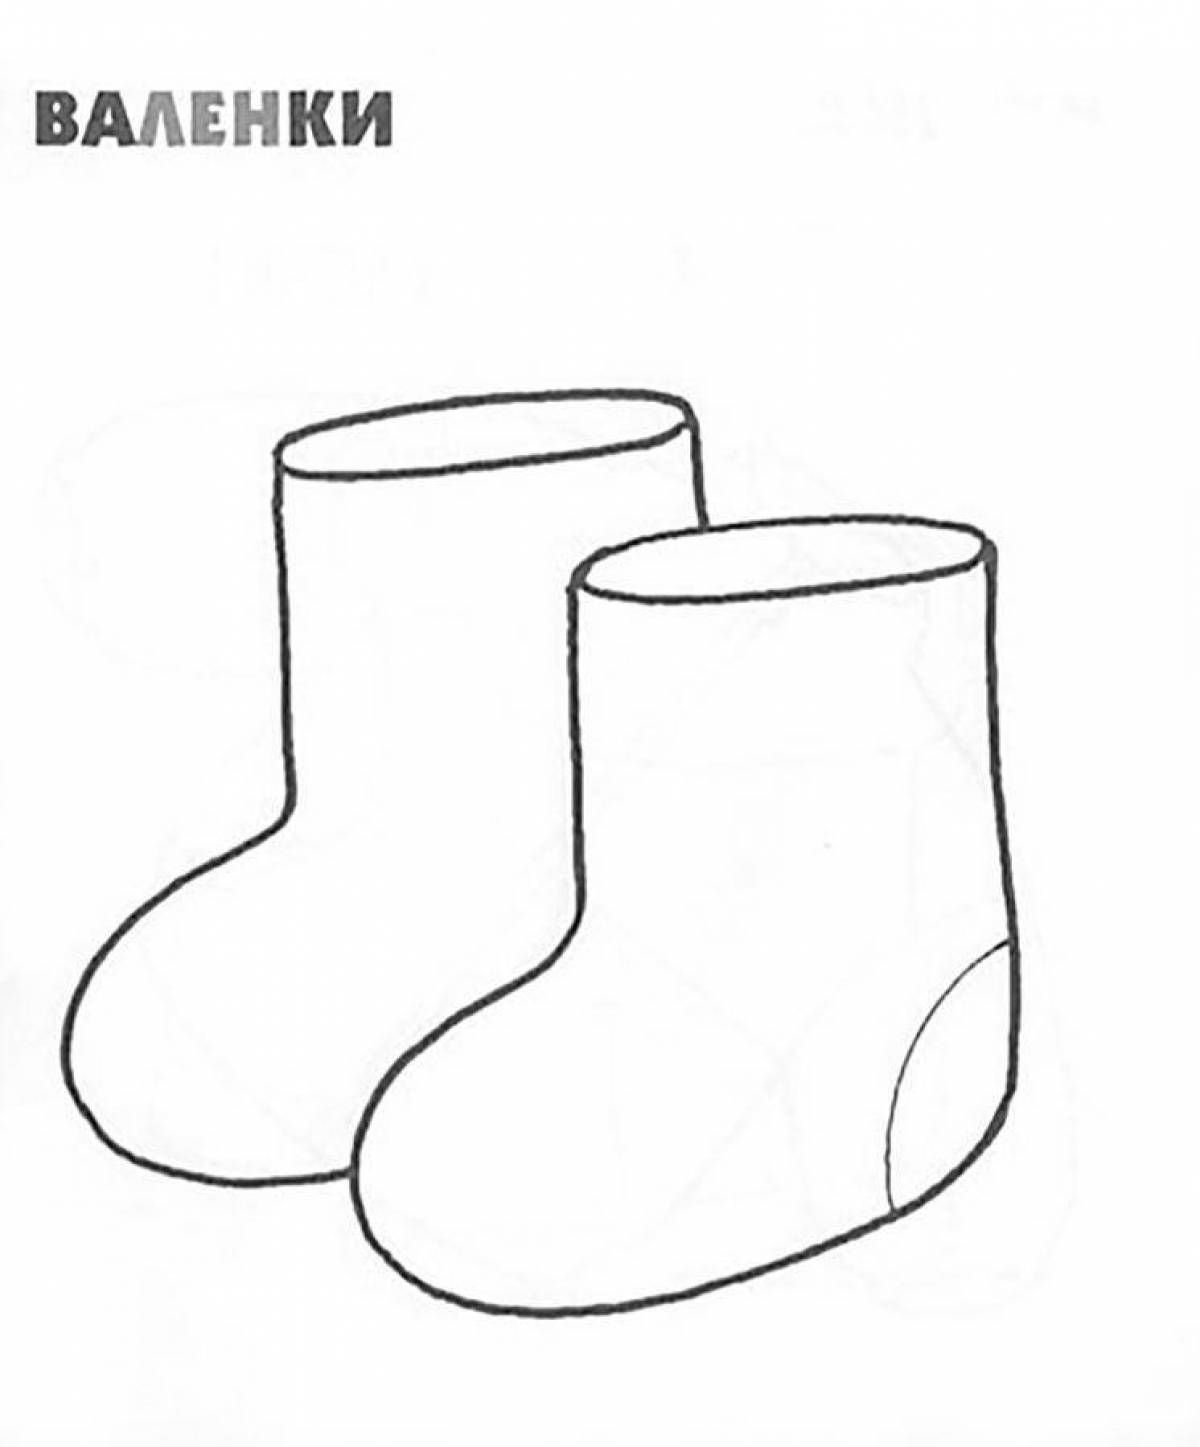 Adorable boots coloring page for kids